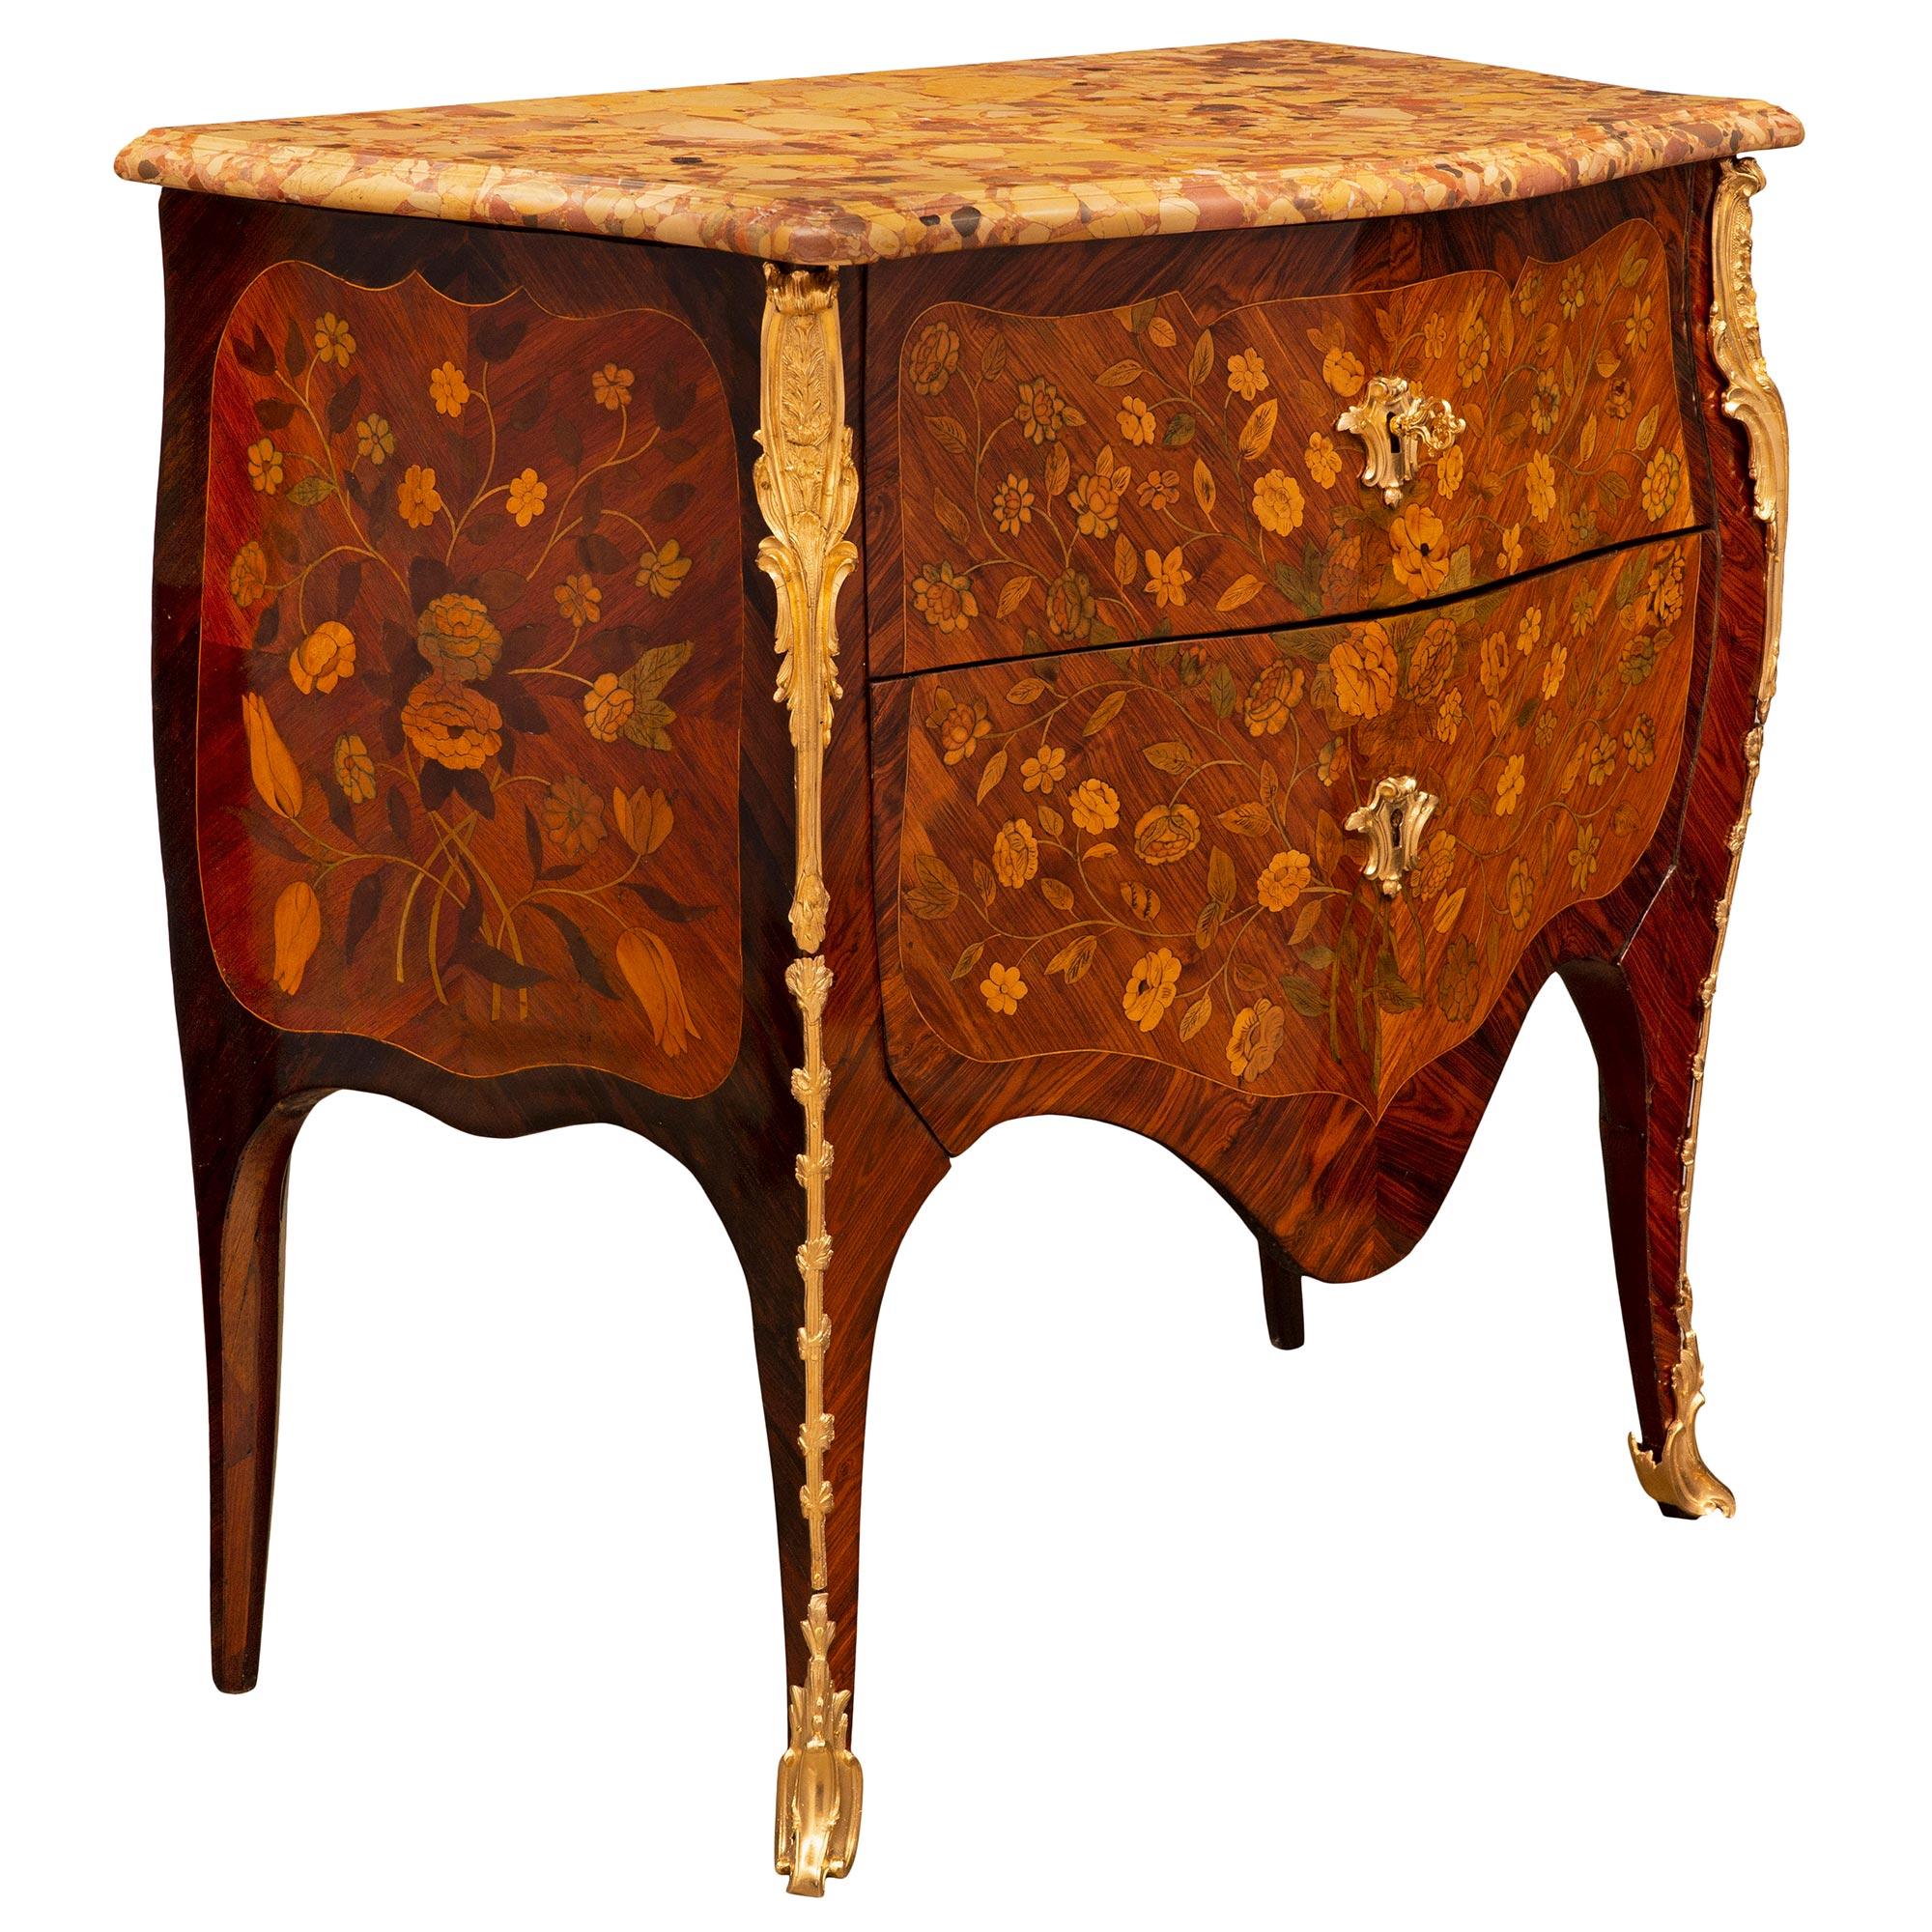 French 18th Century Louis XV Period Rosewood And Brèche D’Alep Marble Commode In Good Condition For Sale In West Palm Beach, FL